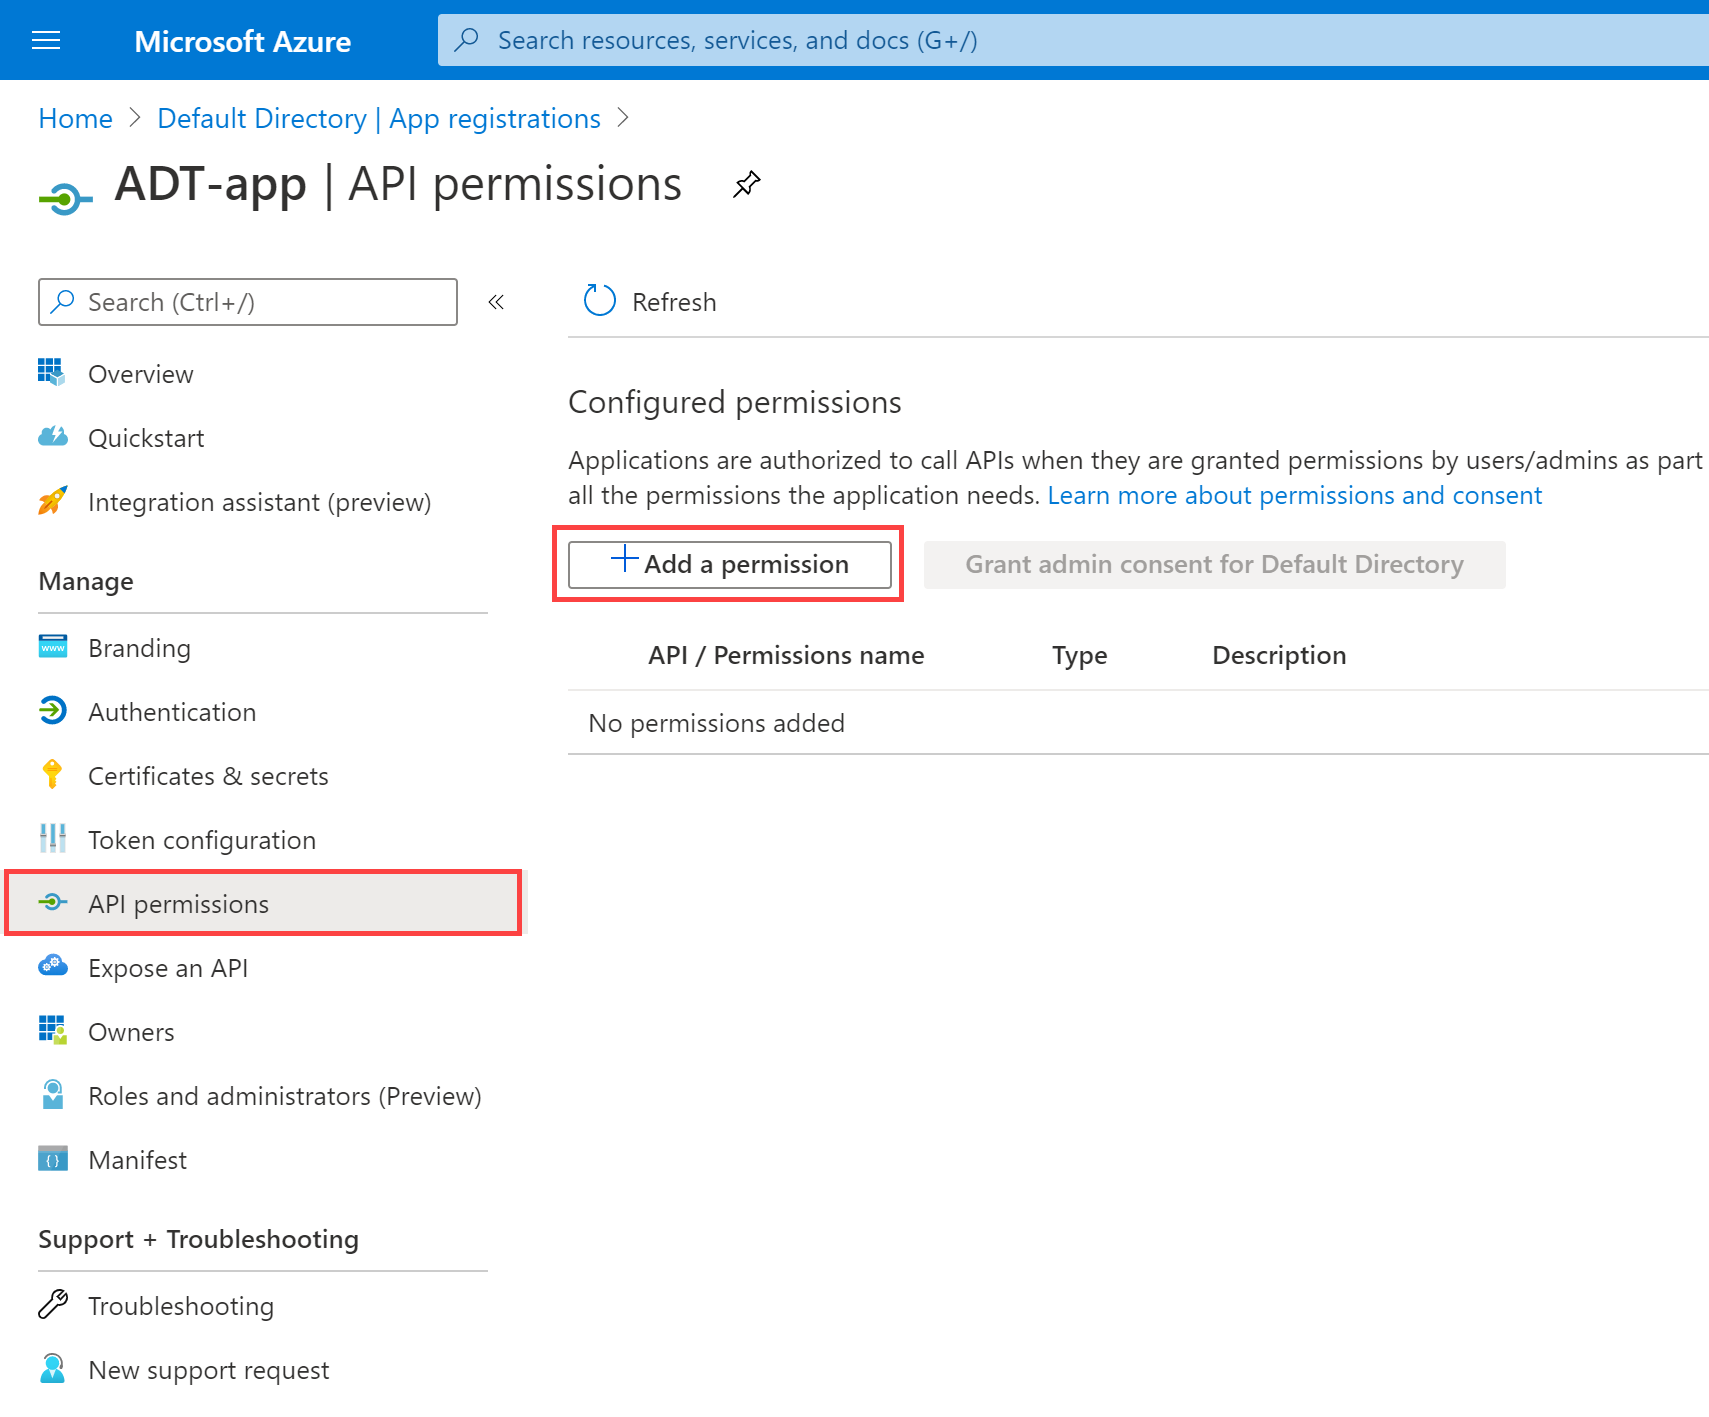 Screenshot of the app registration in the Azure portal, highlighting the 'API permissions' menu option and 'Add a permission' button.